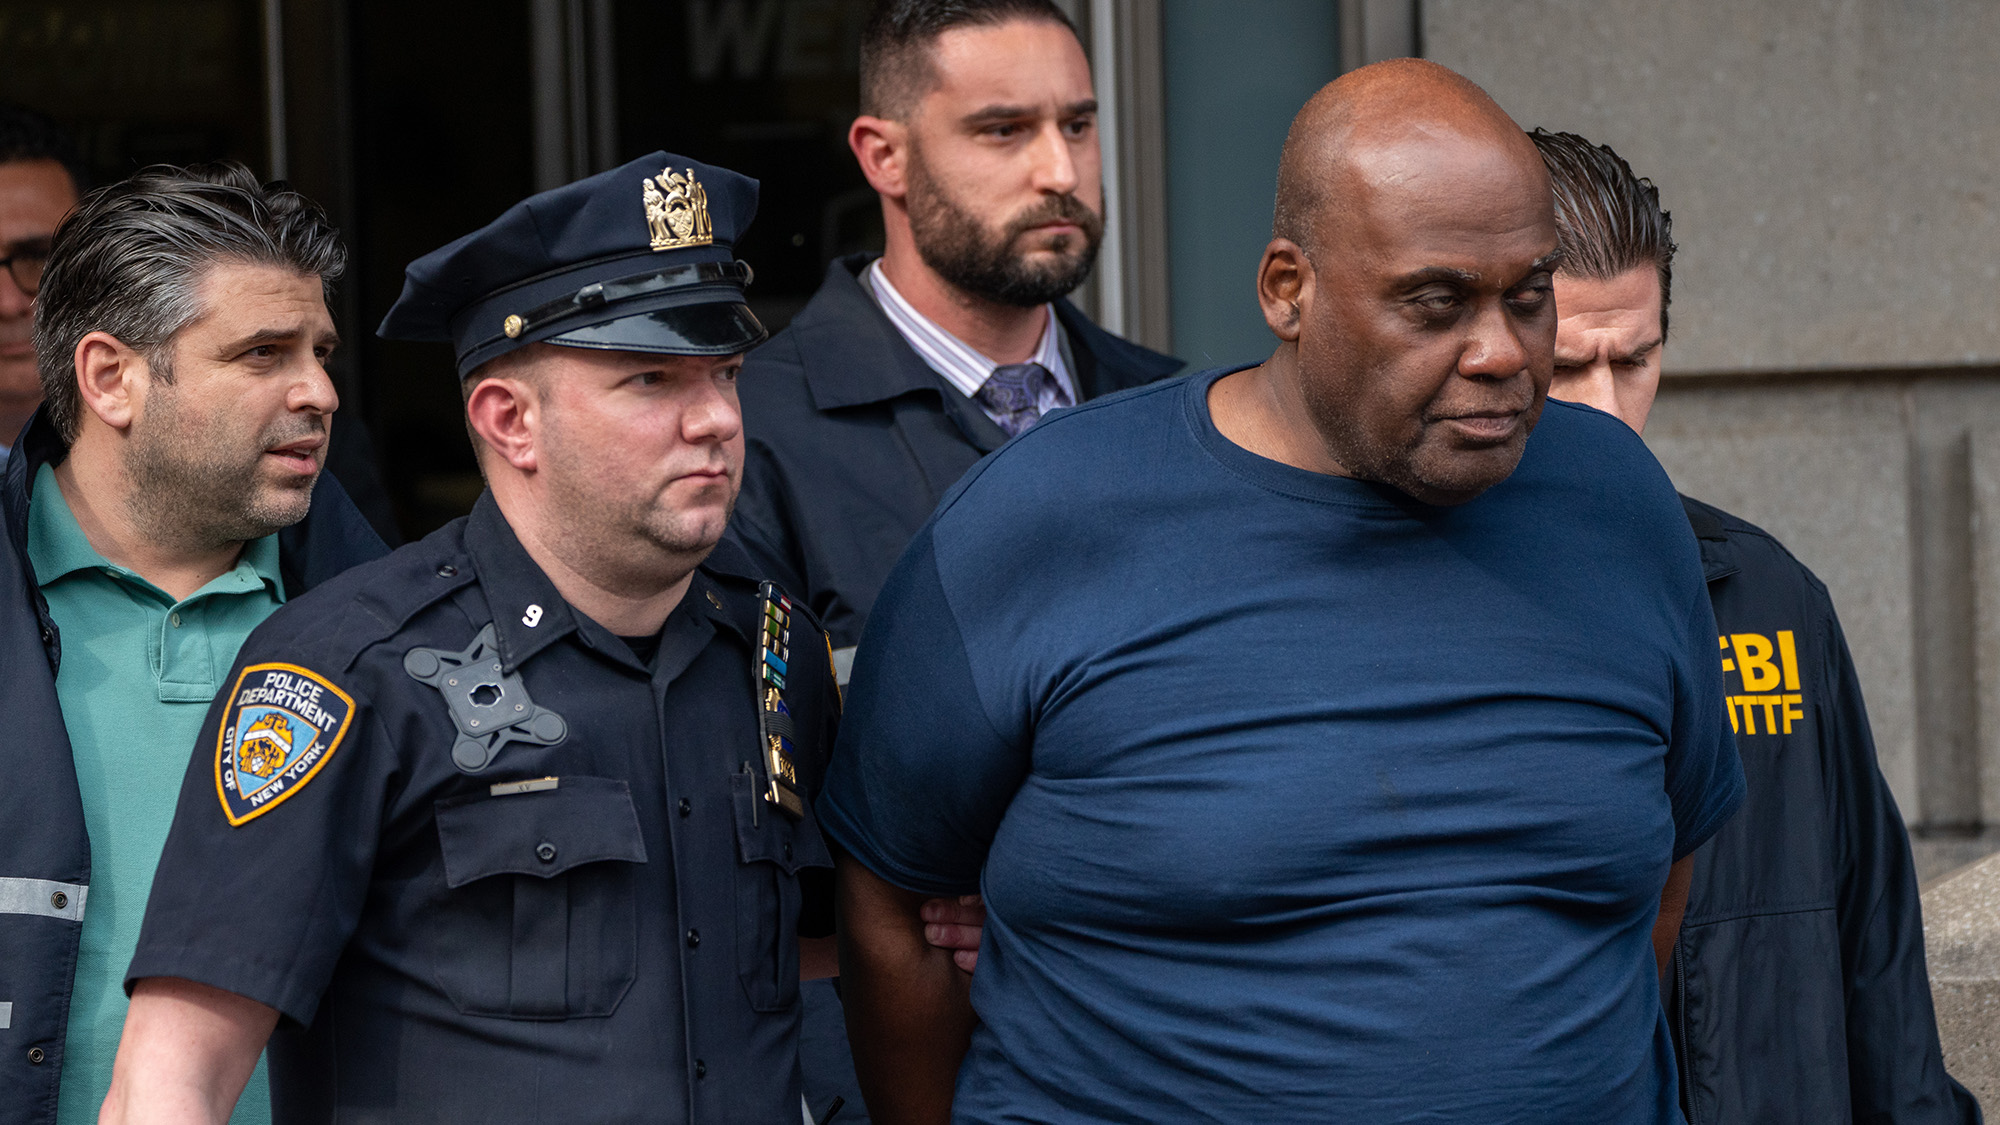 Suspected Brooklyn subway shooter Frank James is escorted out of the 9th Precinct by law enforcement officials after being arrested in New York's East Village neighborhood on Wednesday April 13. 